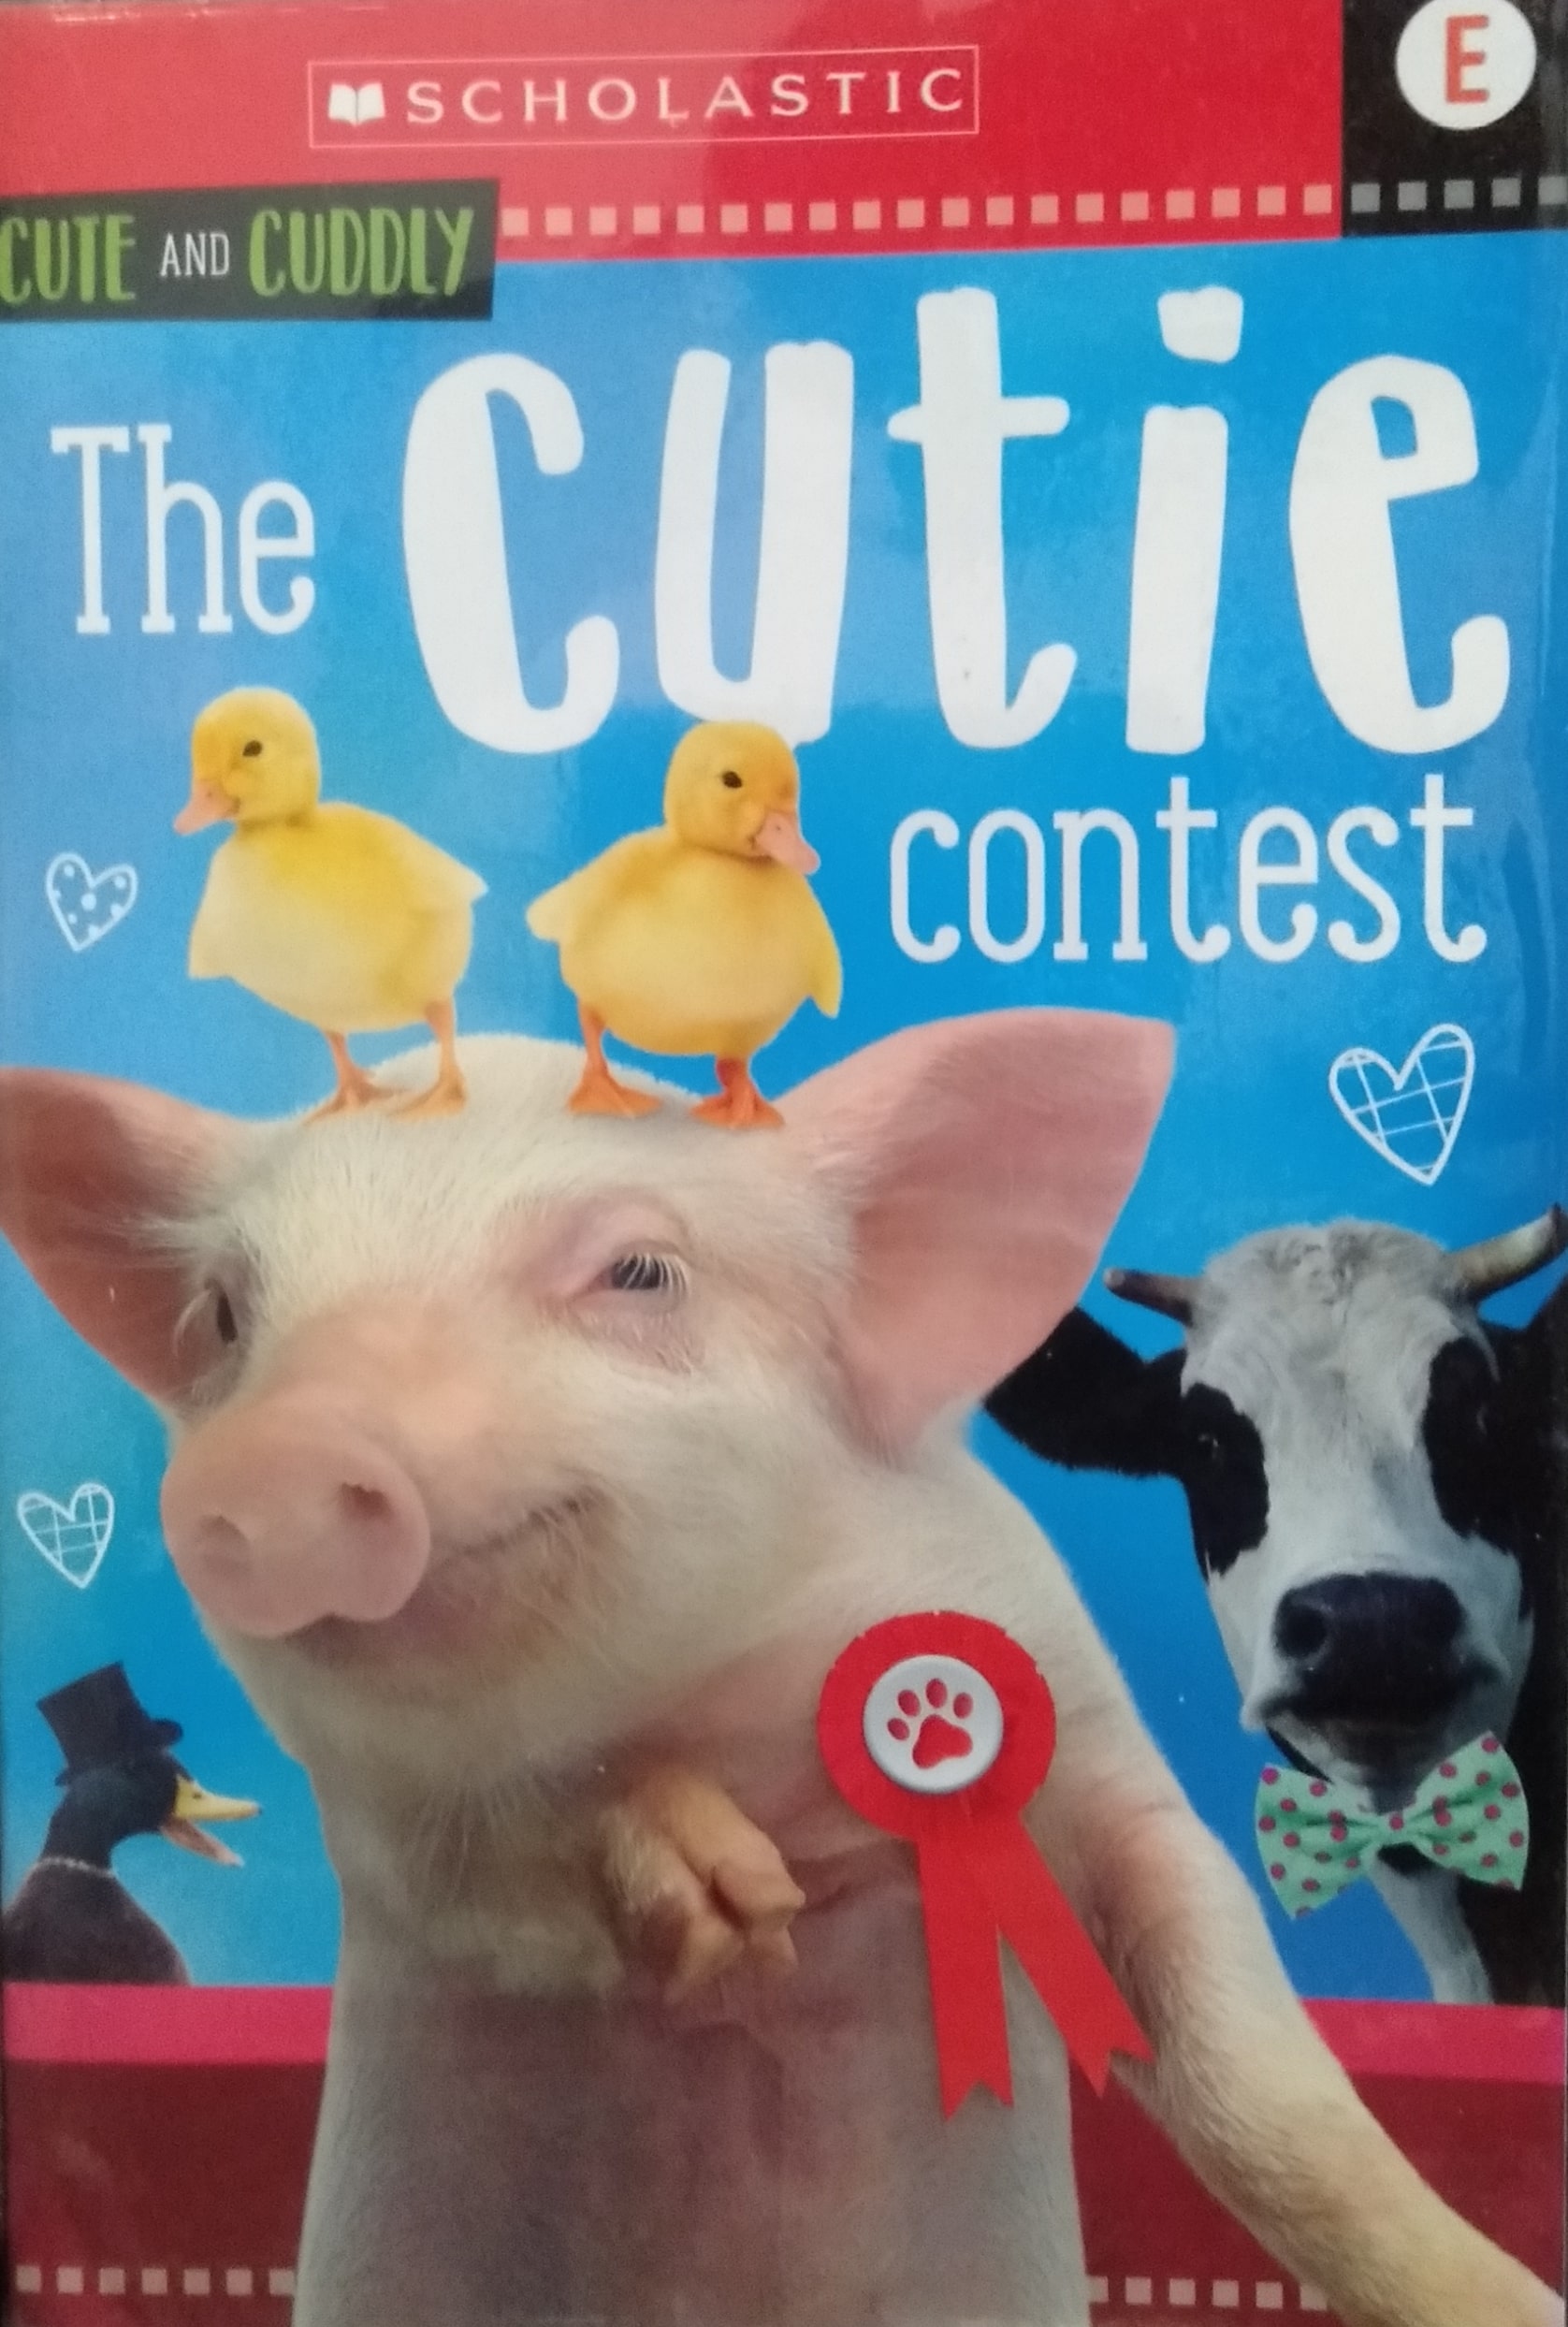 IMG : Animal Antics Cute and Cuddly The cutie Contest